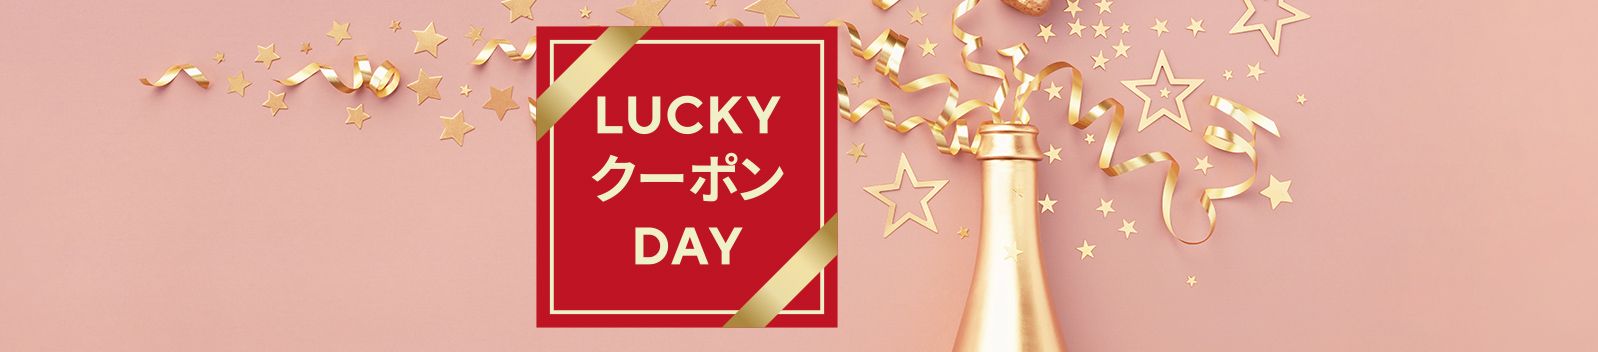 LUCKYクーポンDAY